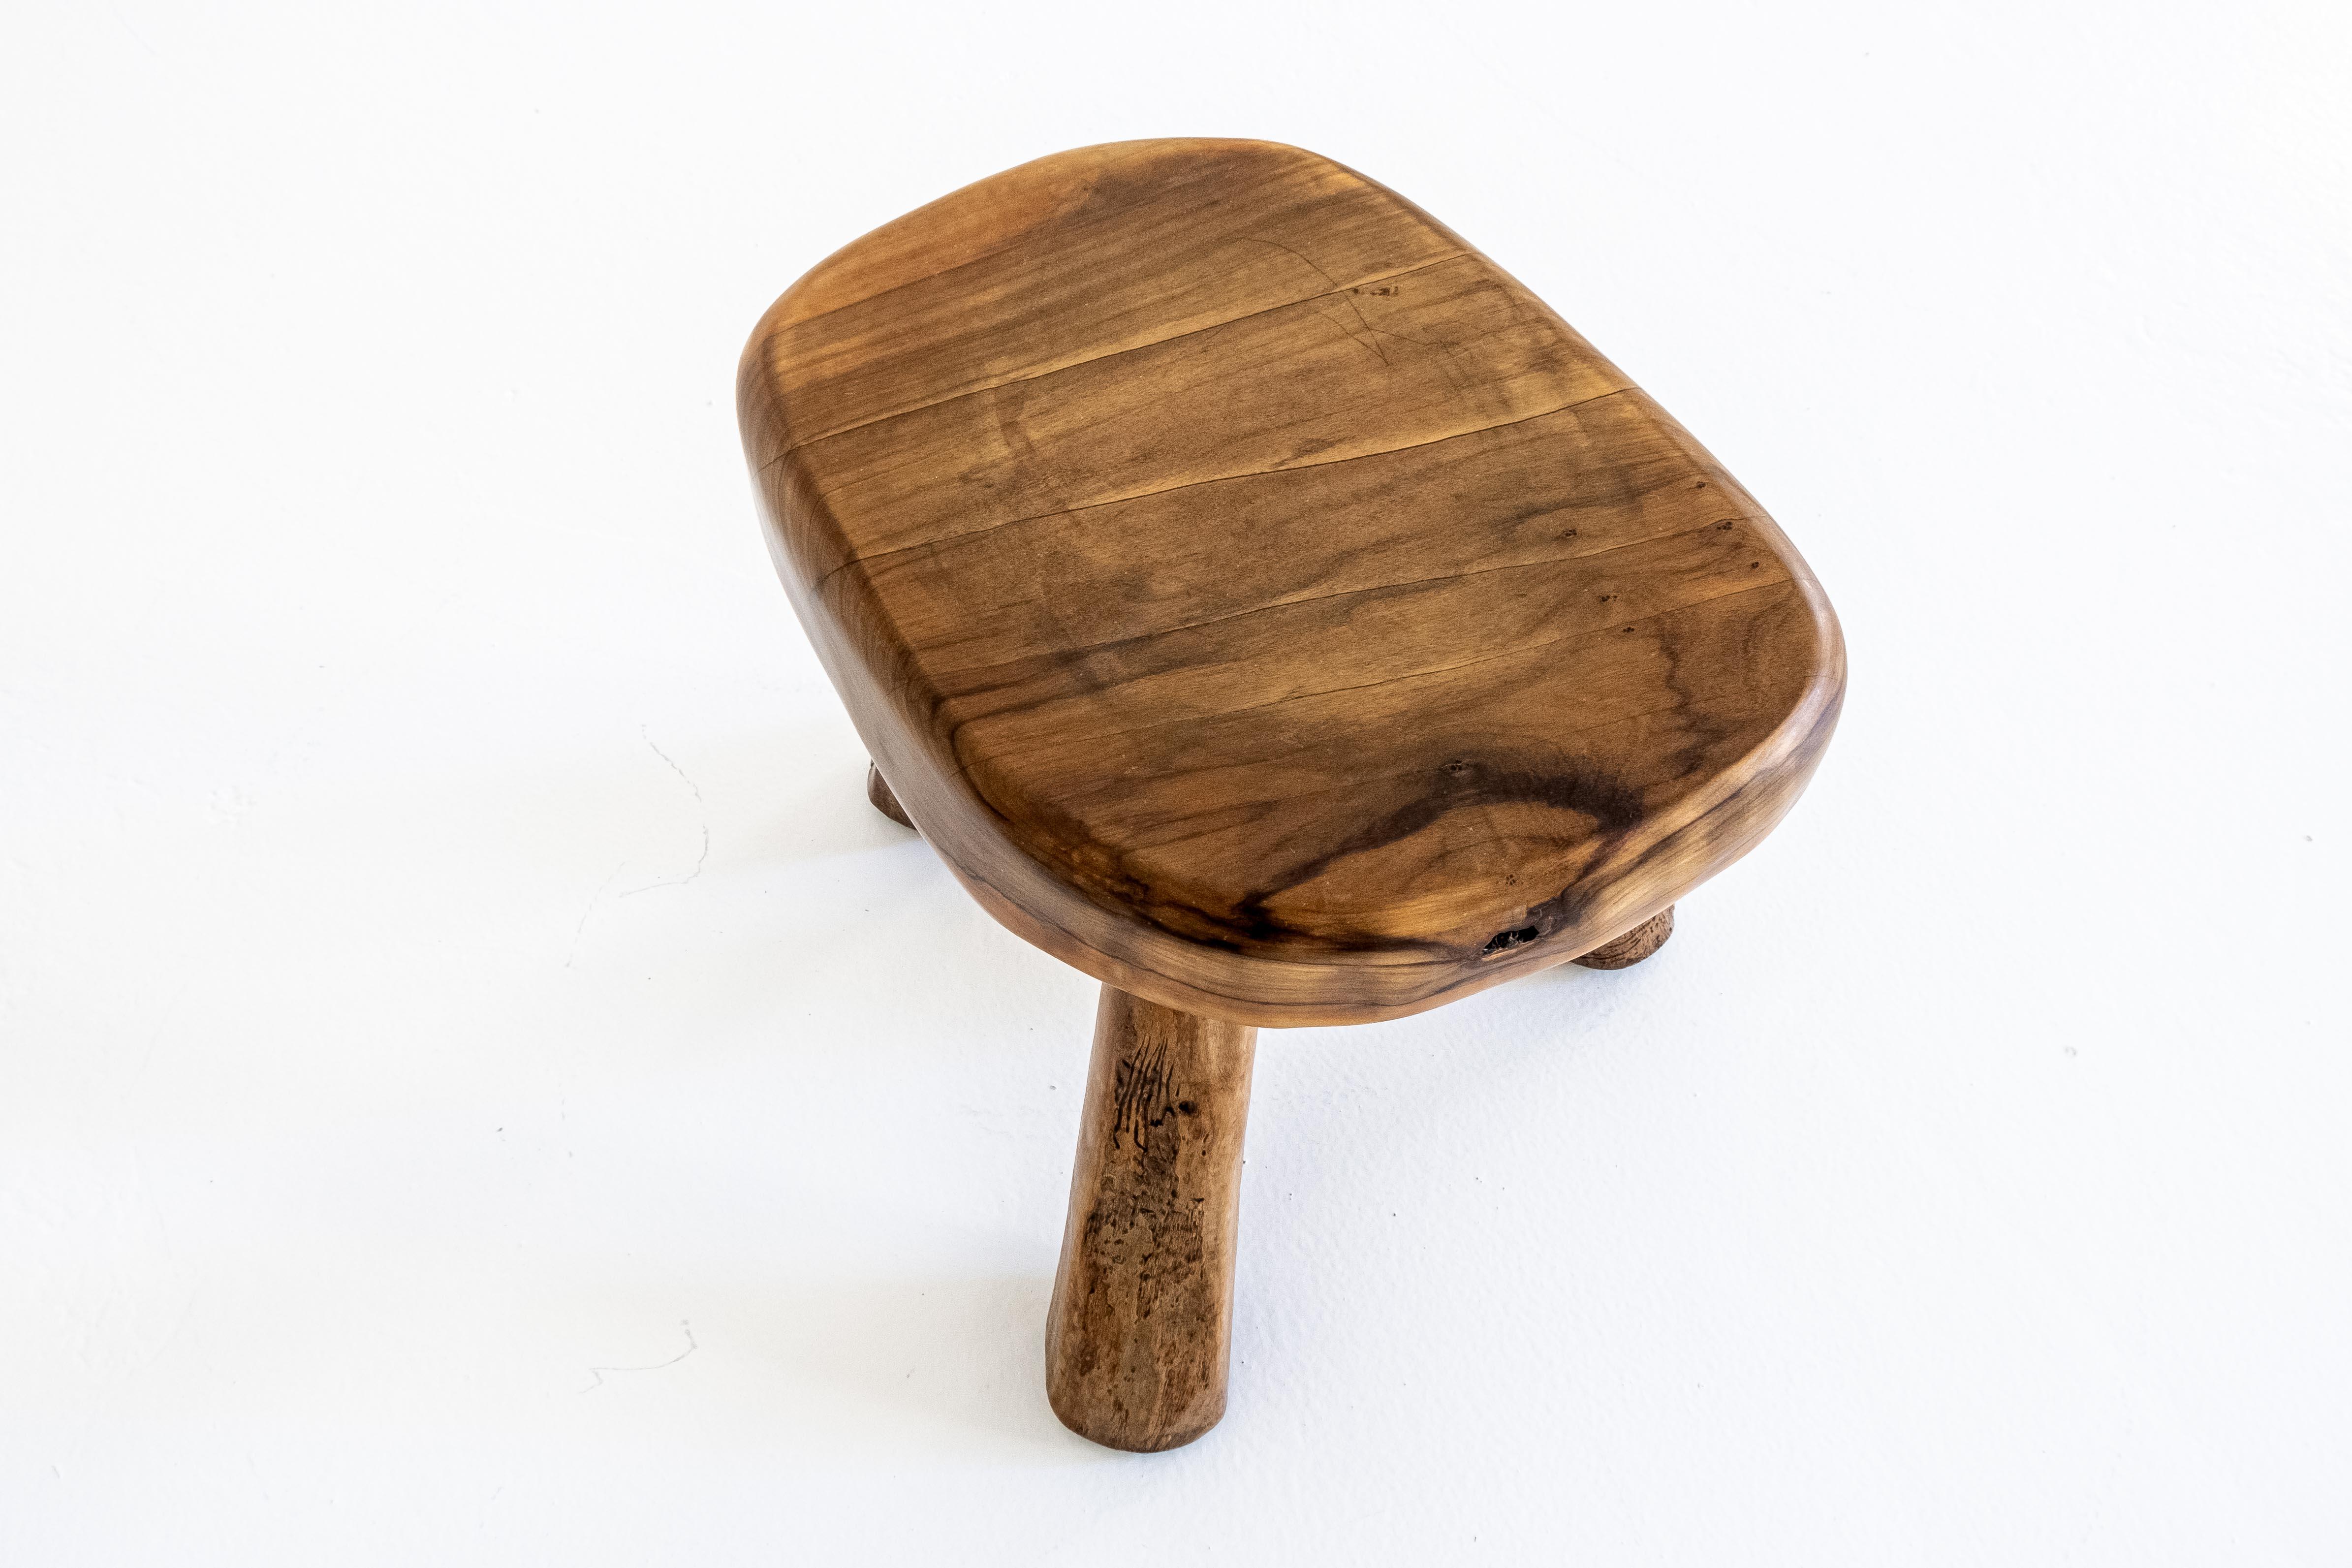 French Handmade, Rustic, Sculptural, Massiv Olive Wood Tripod Stool or Side Table